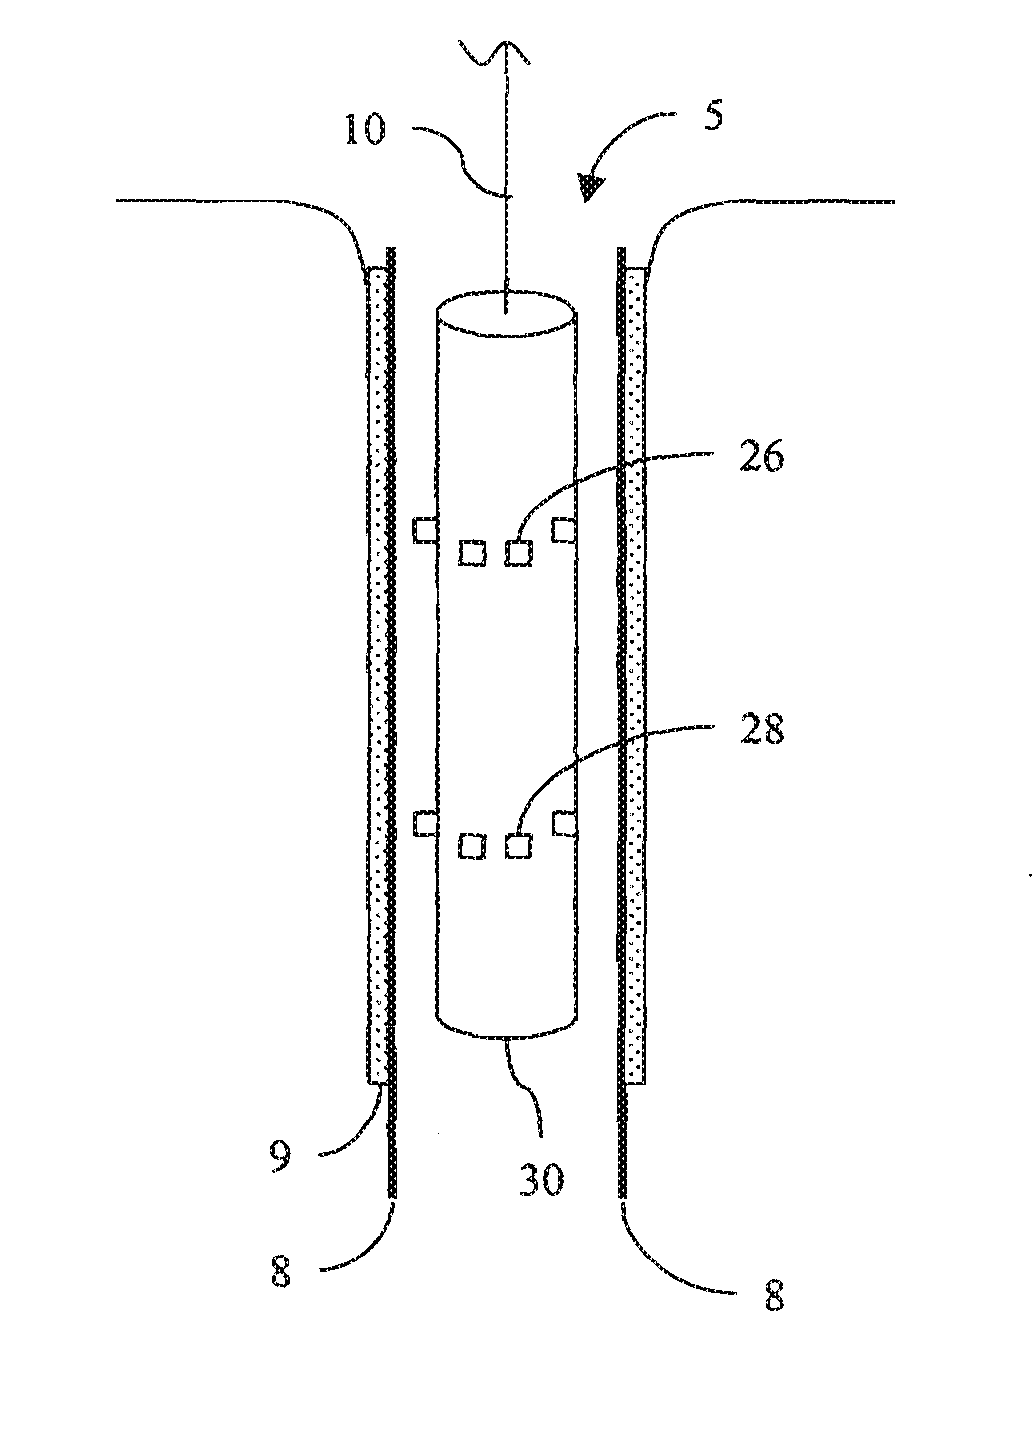 Method and apparatus for generation of acoustic shear waves through casing using physical coupling of vibrating magnets